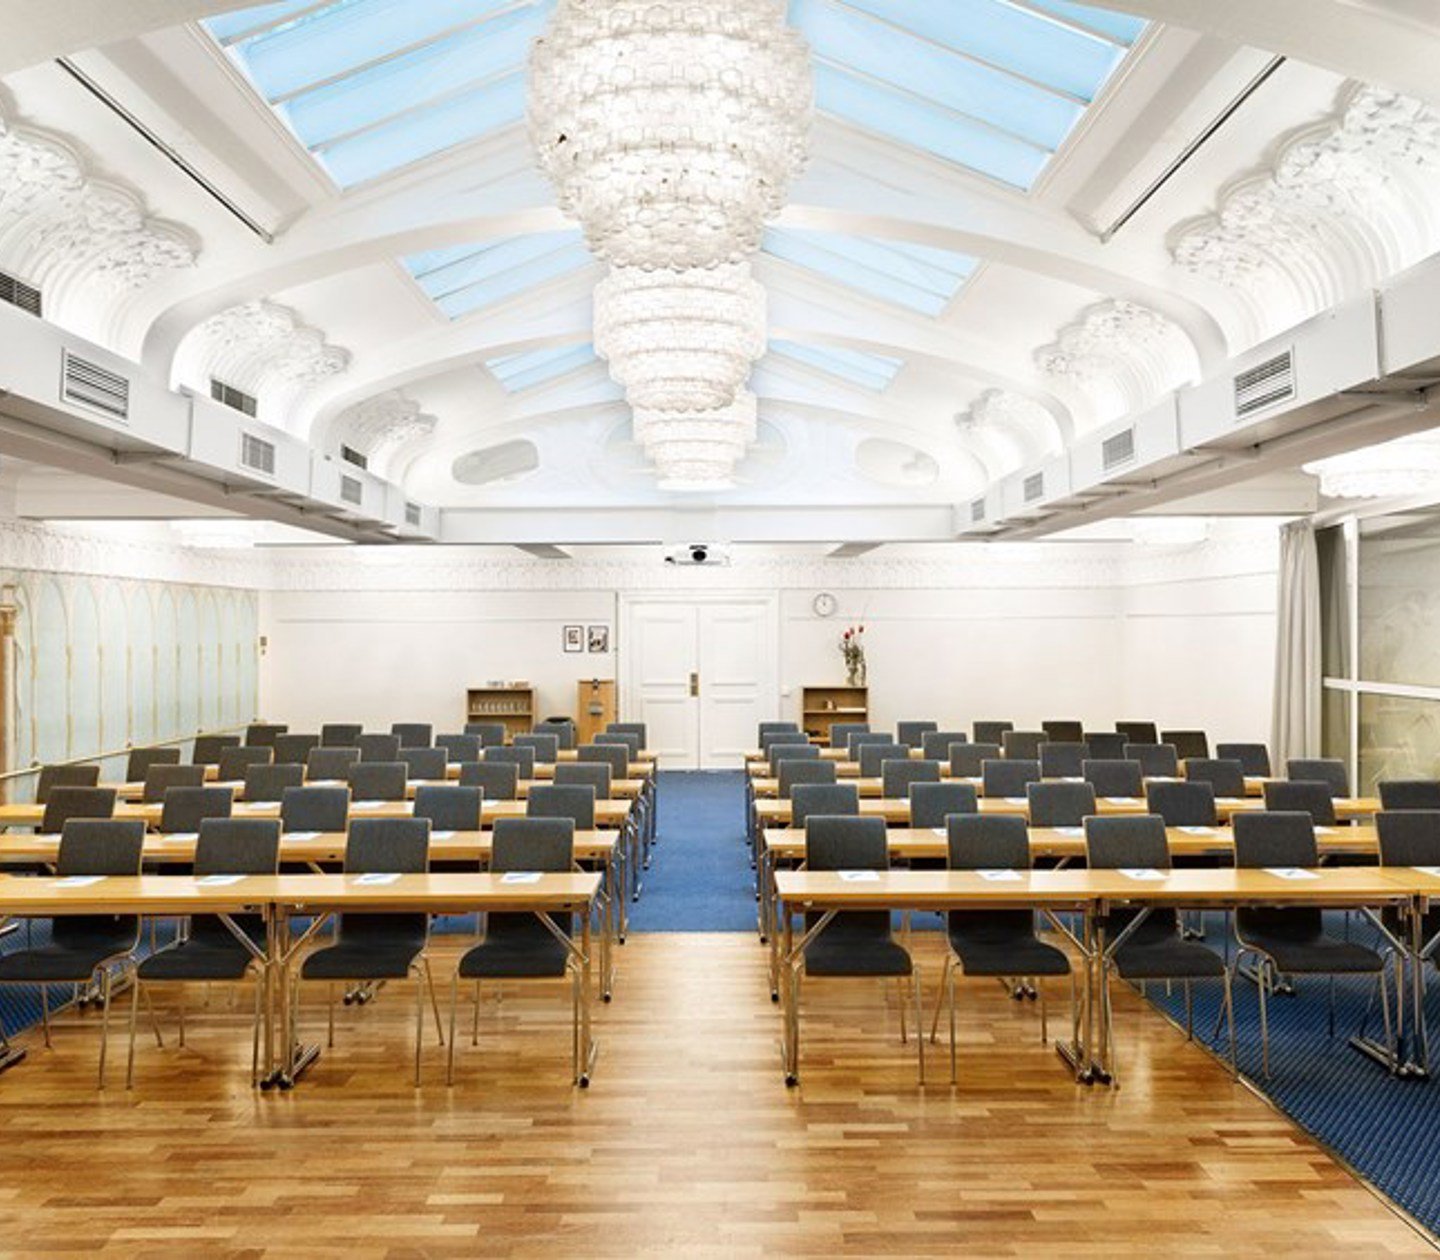 Large and bright conference room with lined up chairs, skylights and wooden floors